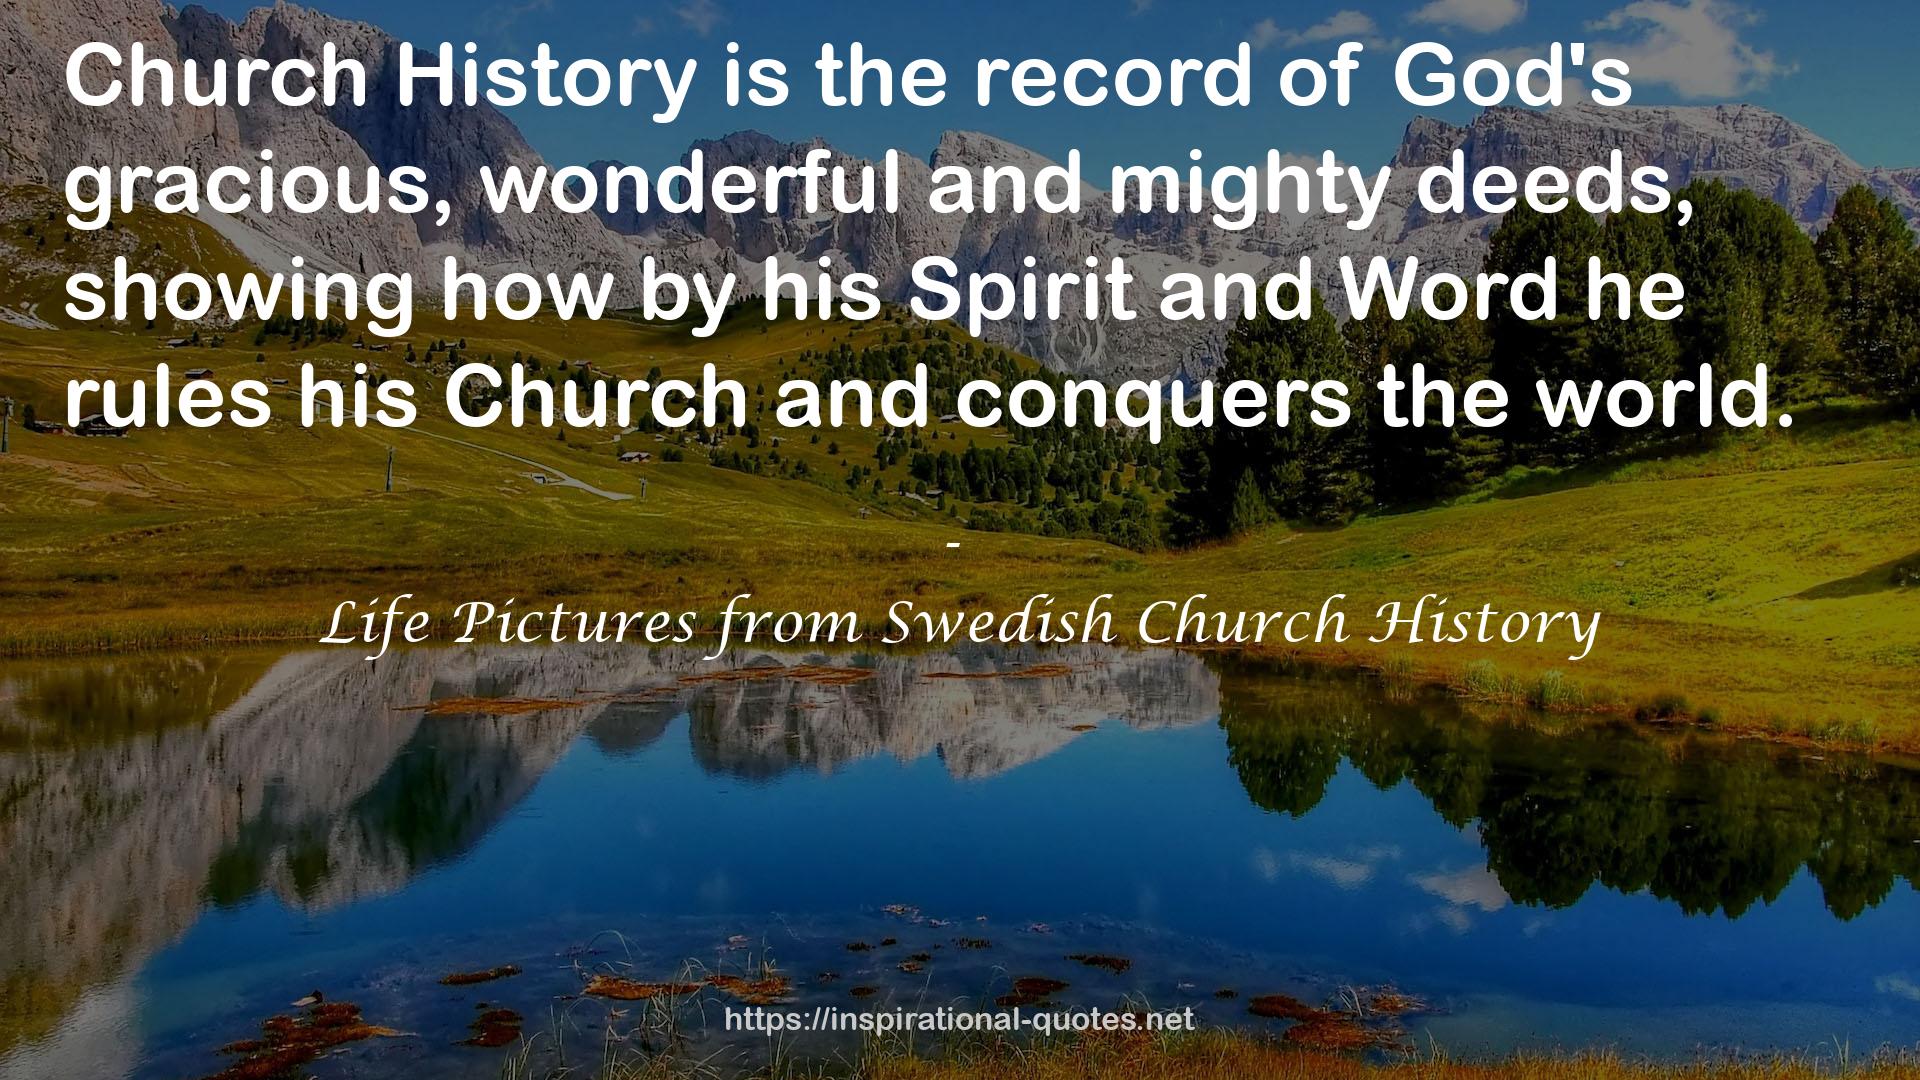 Life Pictures from Swedish Church History QUOTES